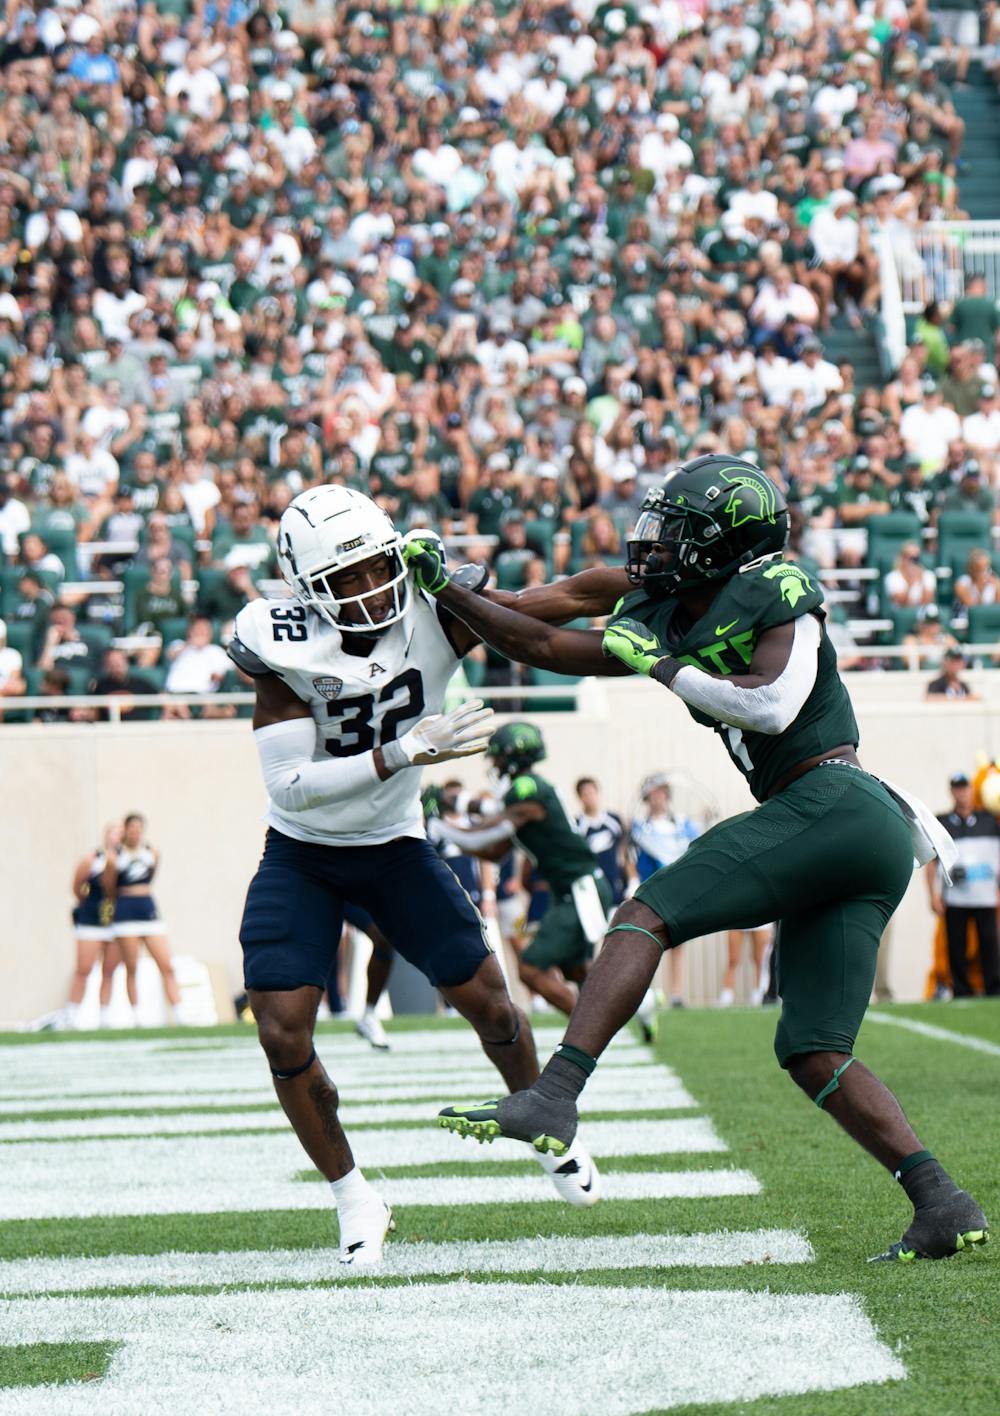 Freshman safety Jaden Mangham (1) blocks Akron freshman running back Anthony Stallworth (32) during a game at Spartan Stadium on Sept. 10, 2022. The Spartans beat the Zips with a score of 52-0.